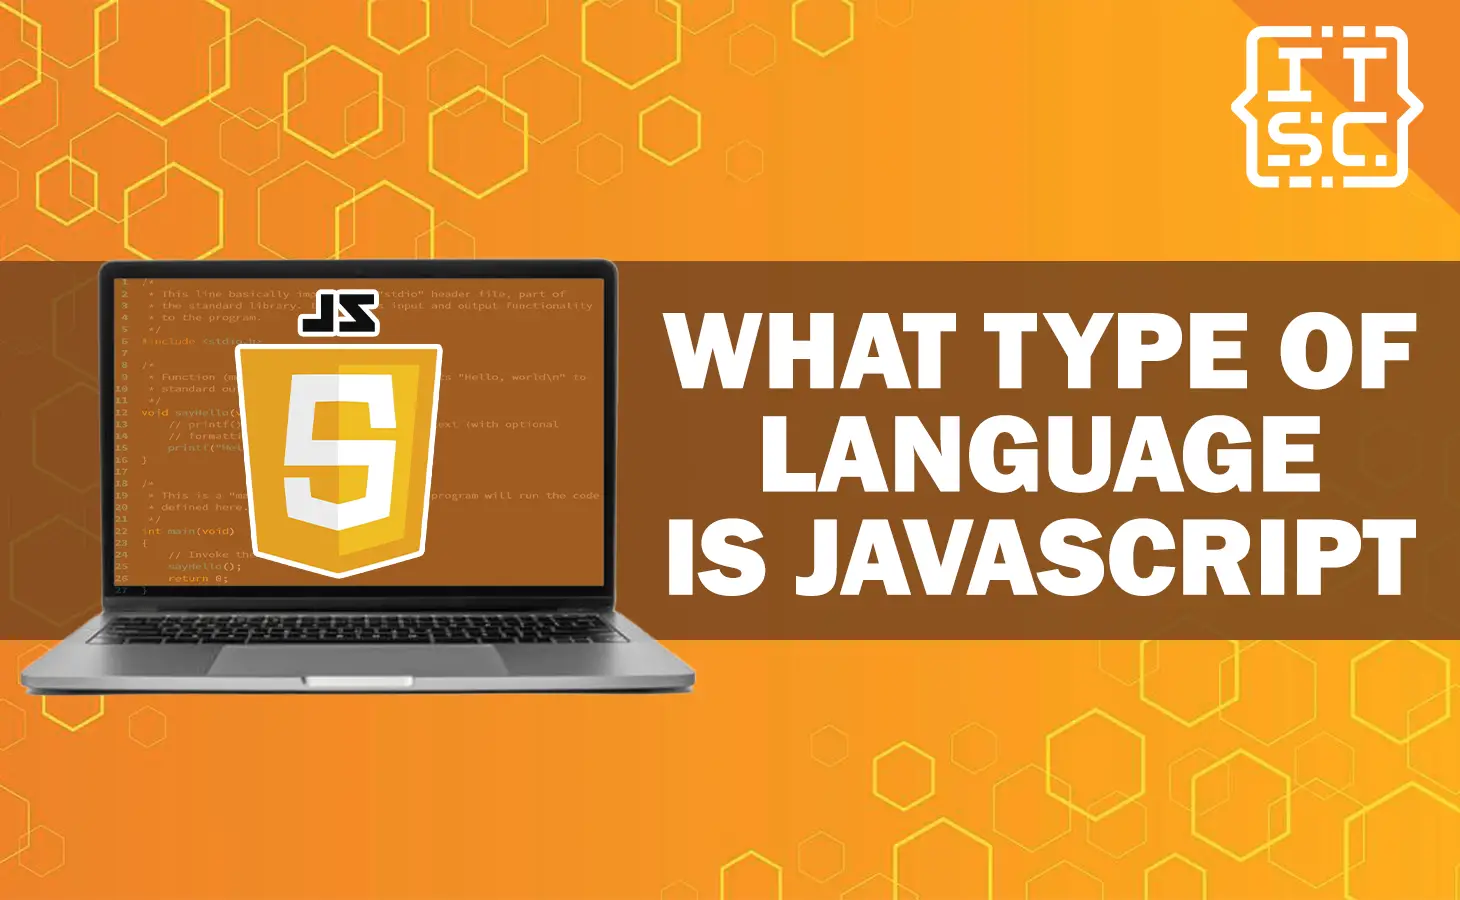 What type of language is JavaScript